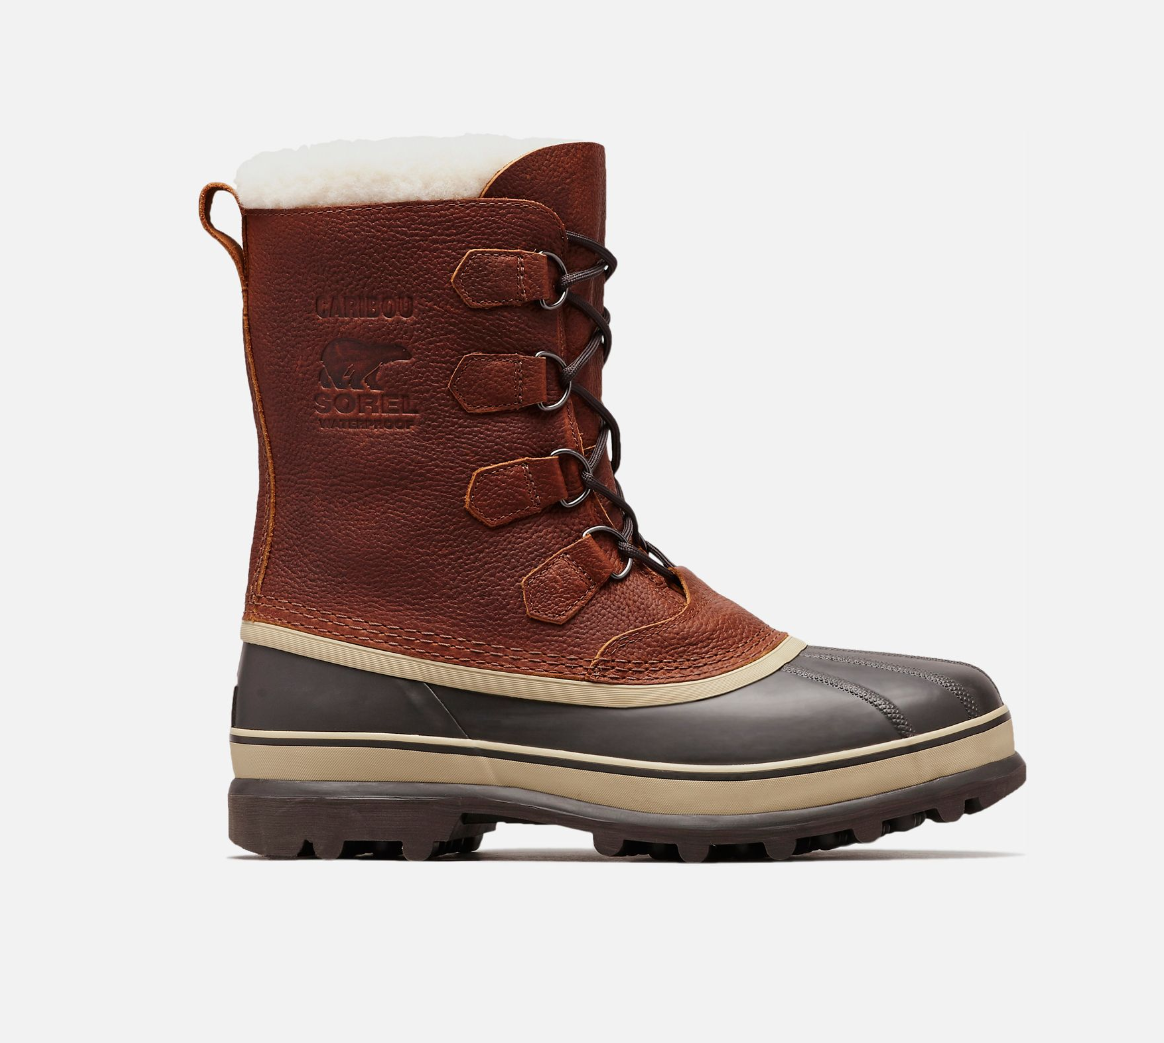 7 Snow Boots That Are Perfect for 